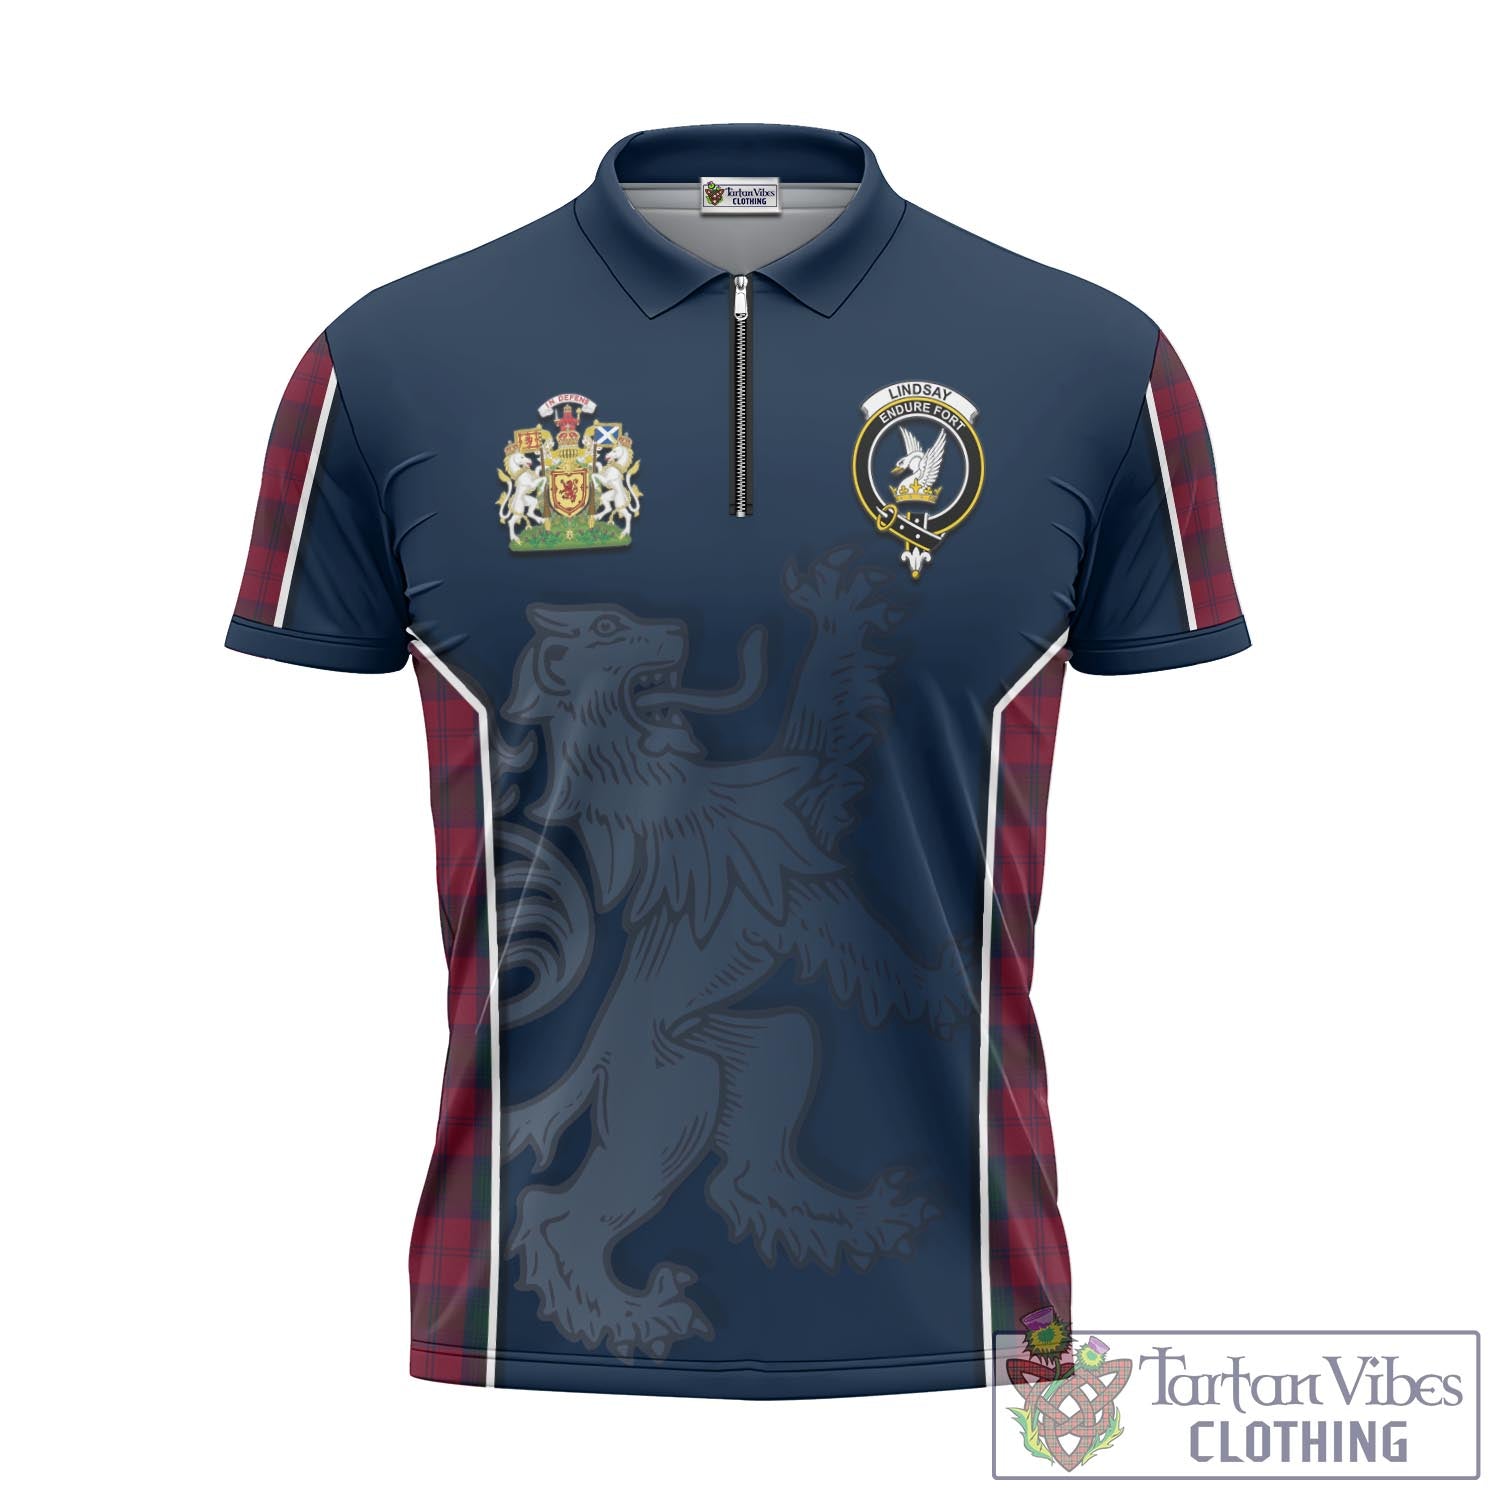 Tartan Vibes Clothing Lindsay Tartan Zipper Polo Shirt with Family Crest and Lion Rampant Vibes Sport Style